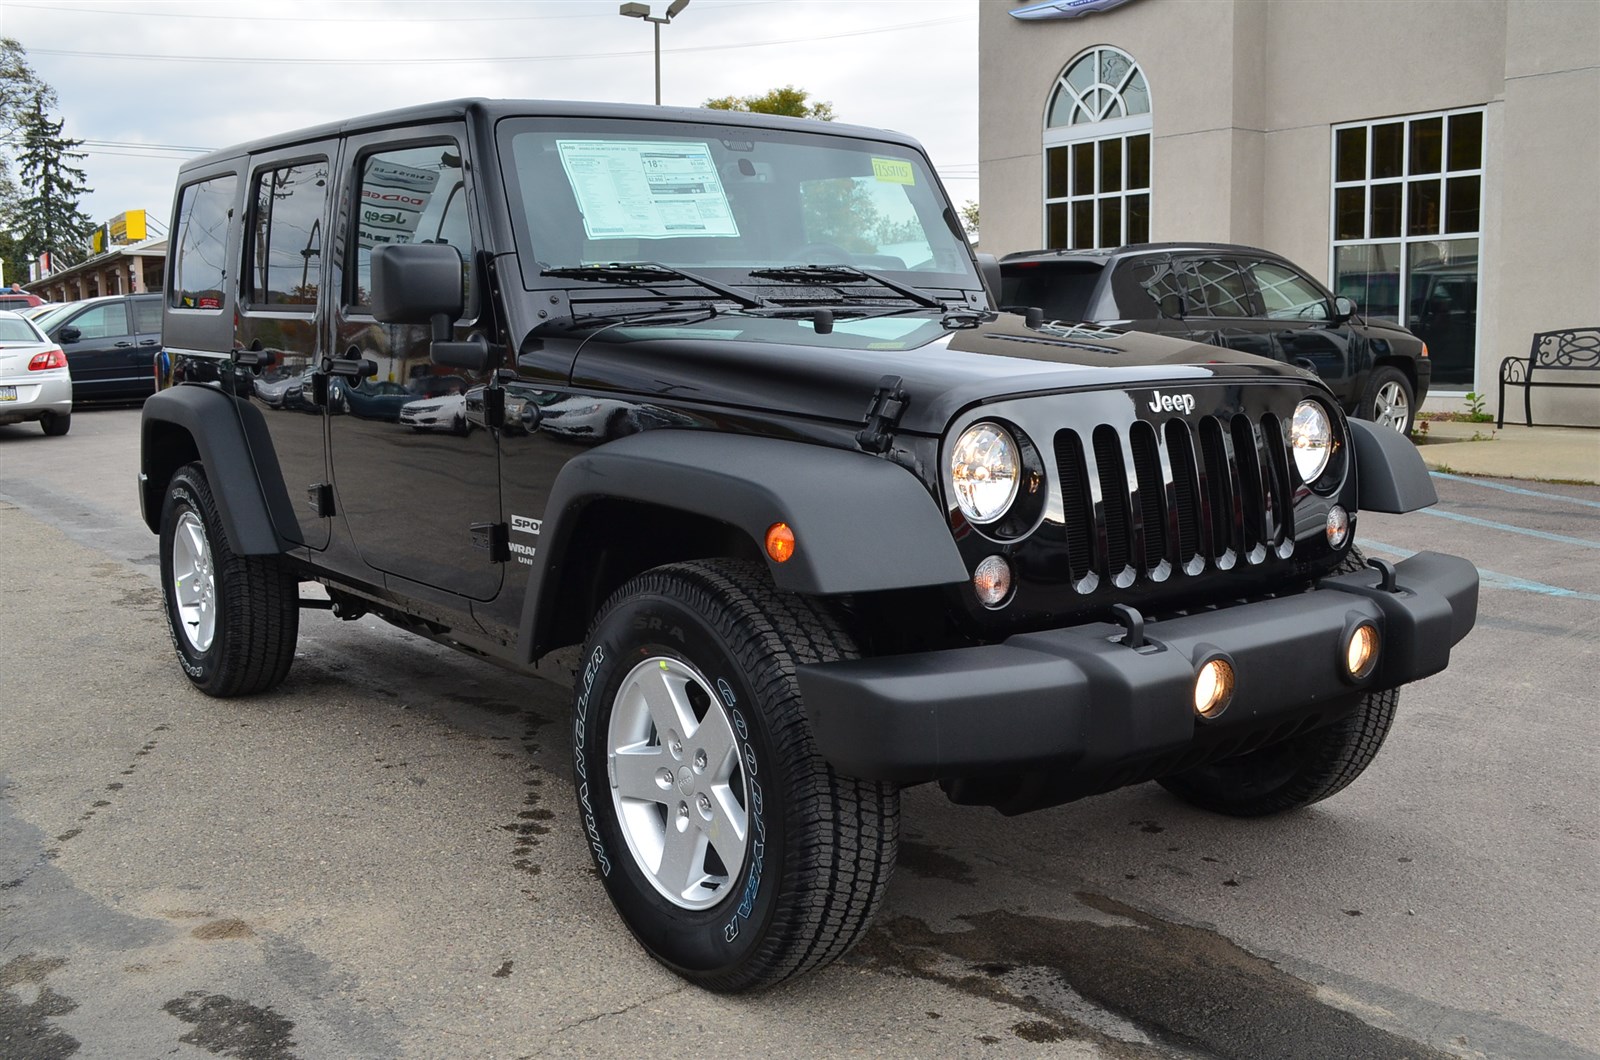 Jeep is 12 in List of Cheapest Vehicles to Insure in the U.S. Rush Times